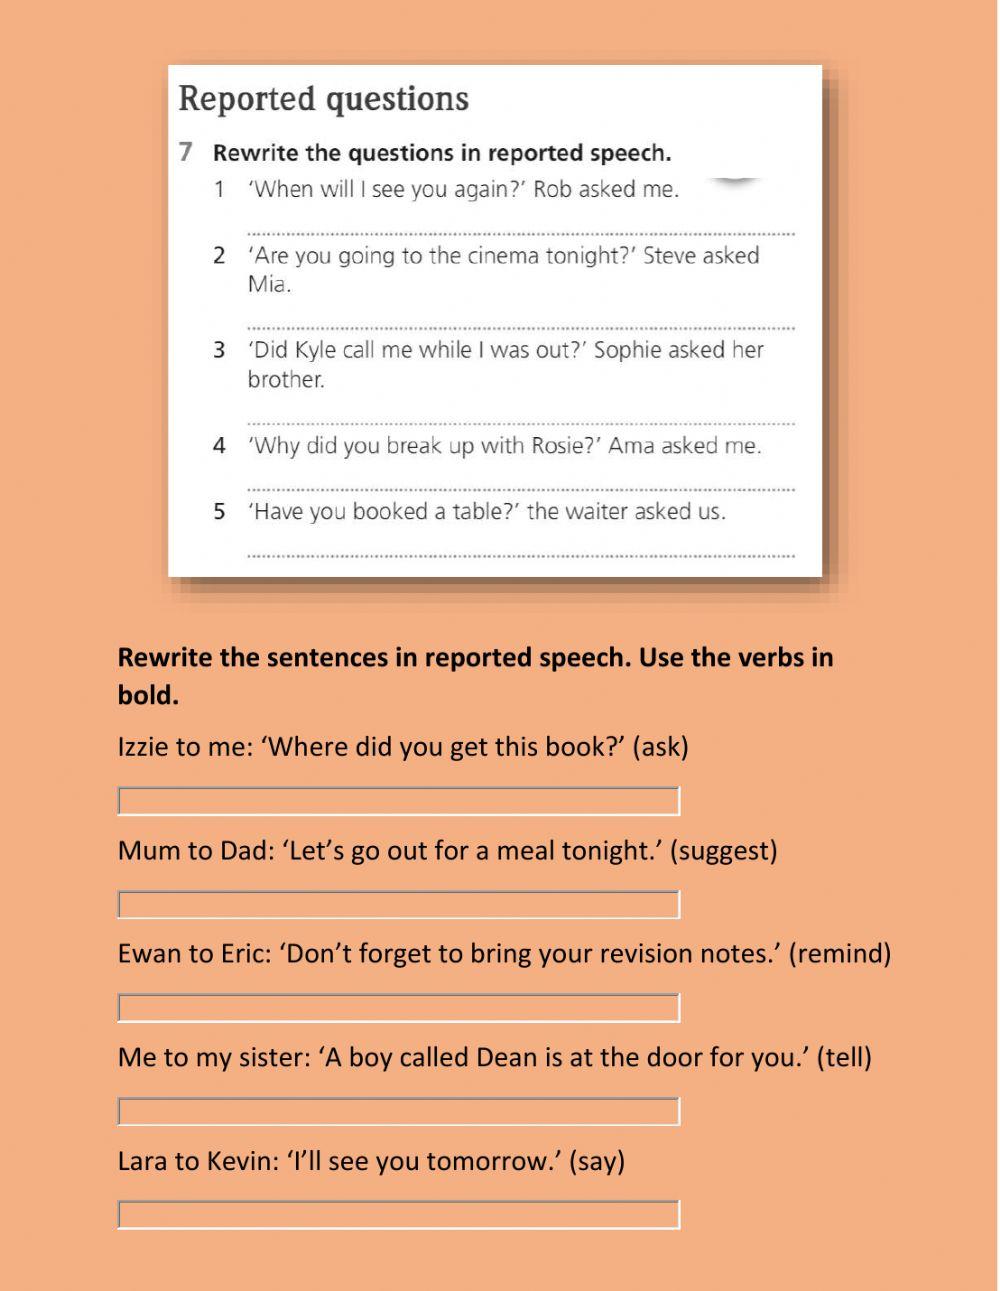 REPORTED SPEECH Reporting verbs, commands and questions. Say and tell.